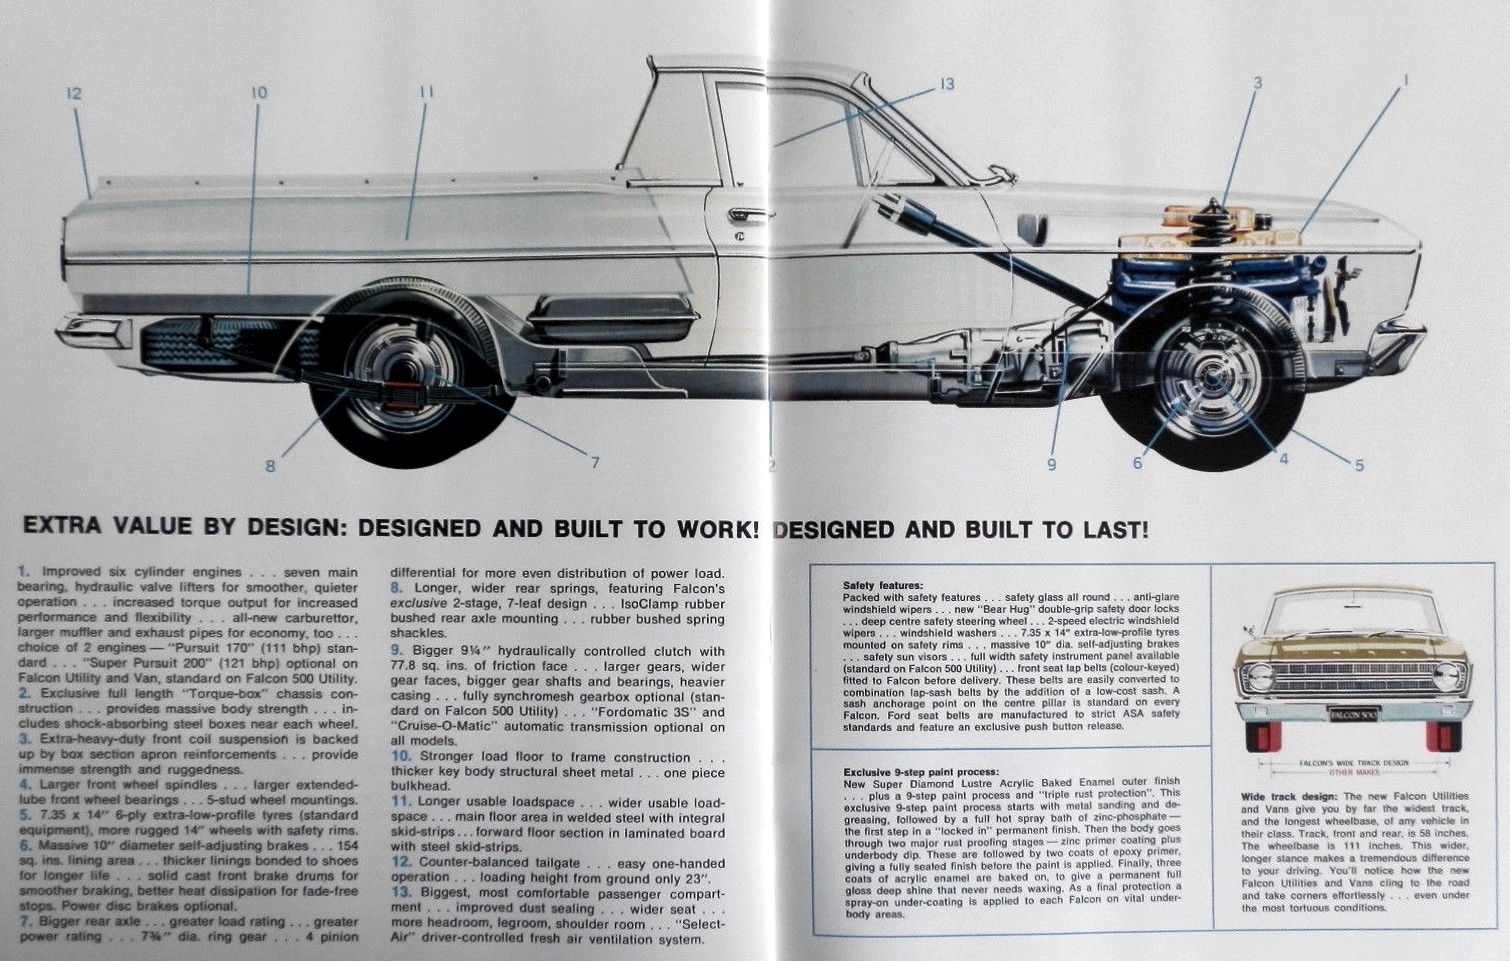 1966 Ford XR Falcon Ute and Van Brochure Page 3